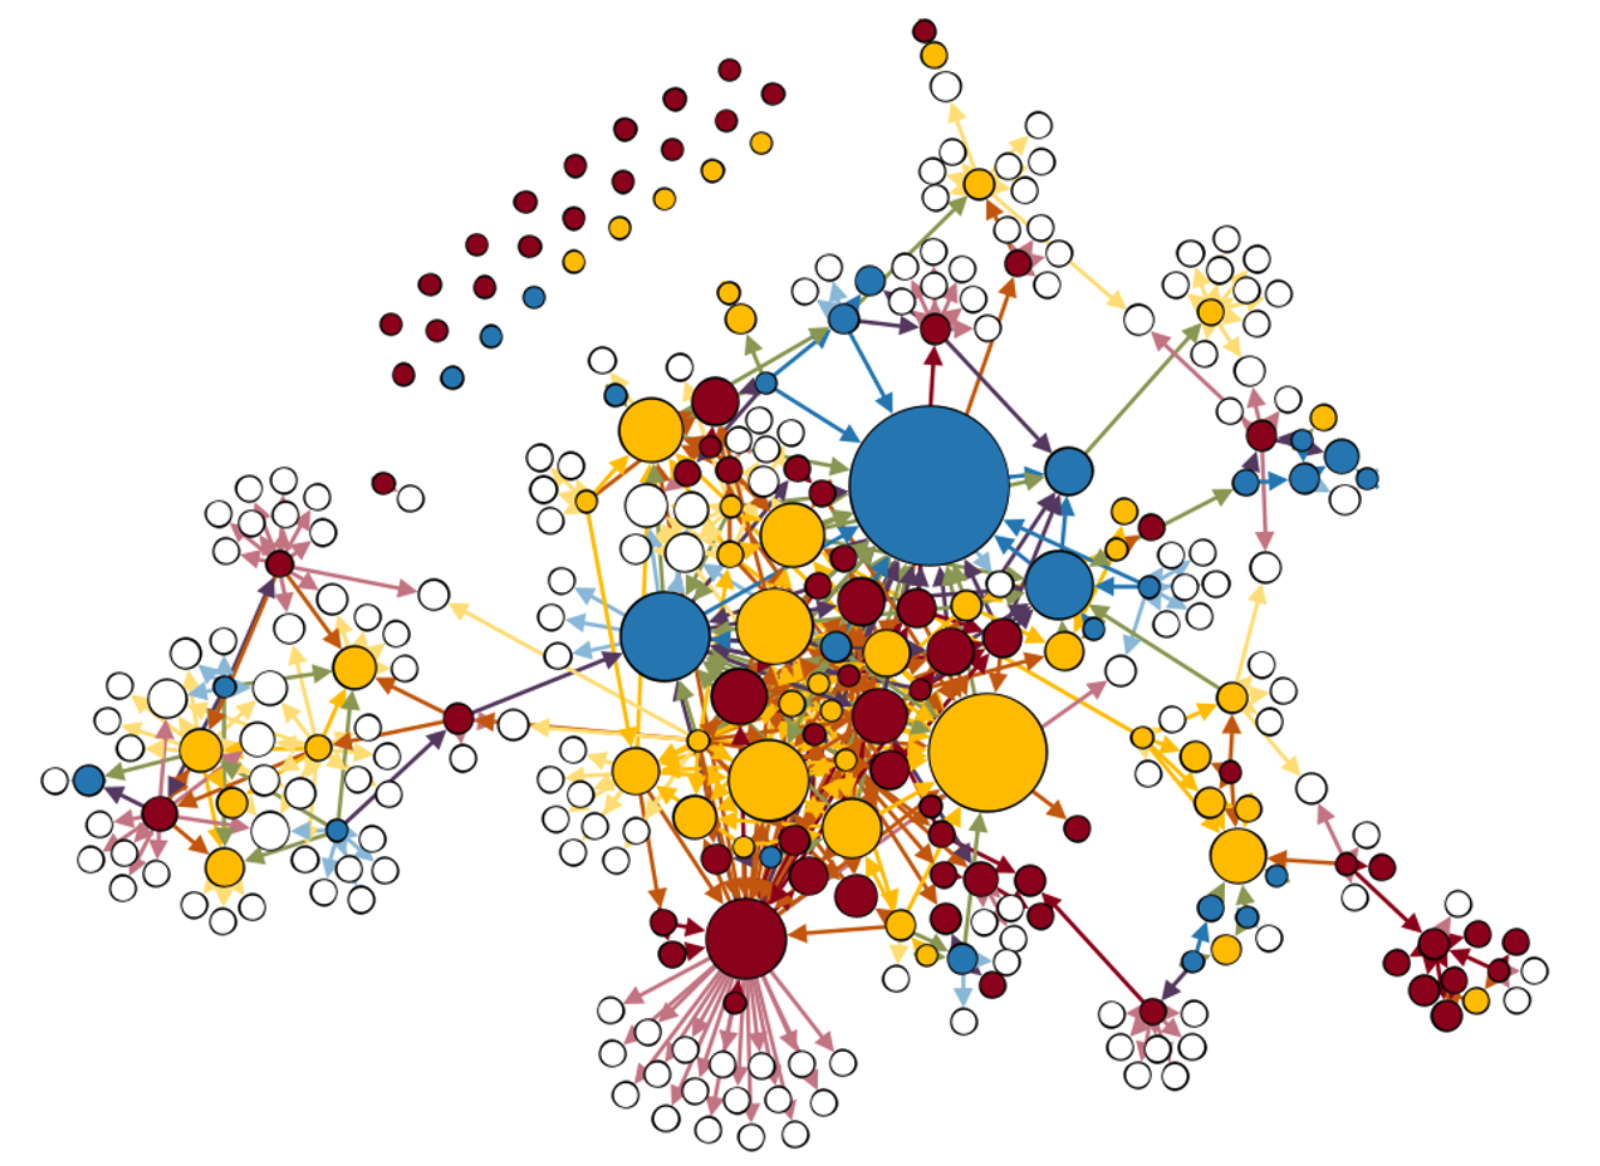 This is a network depicting 149 studies that test population differences in testosterone from 1966-2017. The nodes represent publications while the ties represent claims about population differences in testosterone. The size of the node signifies the number of times each study is cited within the network and colors of the nodes align with the outcomes of studies - red meaning no differences in testosterone, yellow meaning mixed results, and blue meaning clear differences in testosterone between the populations being tested. My analysis reveals that the majority of existing fails to find difference in testosterone between racialized populations, despite the fact that these claims are widespread throughout the literature.